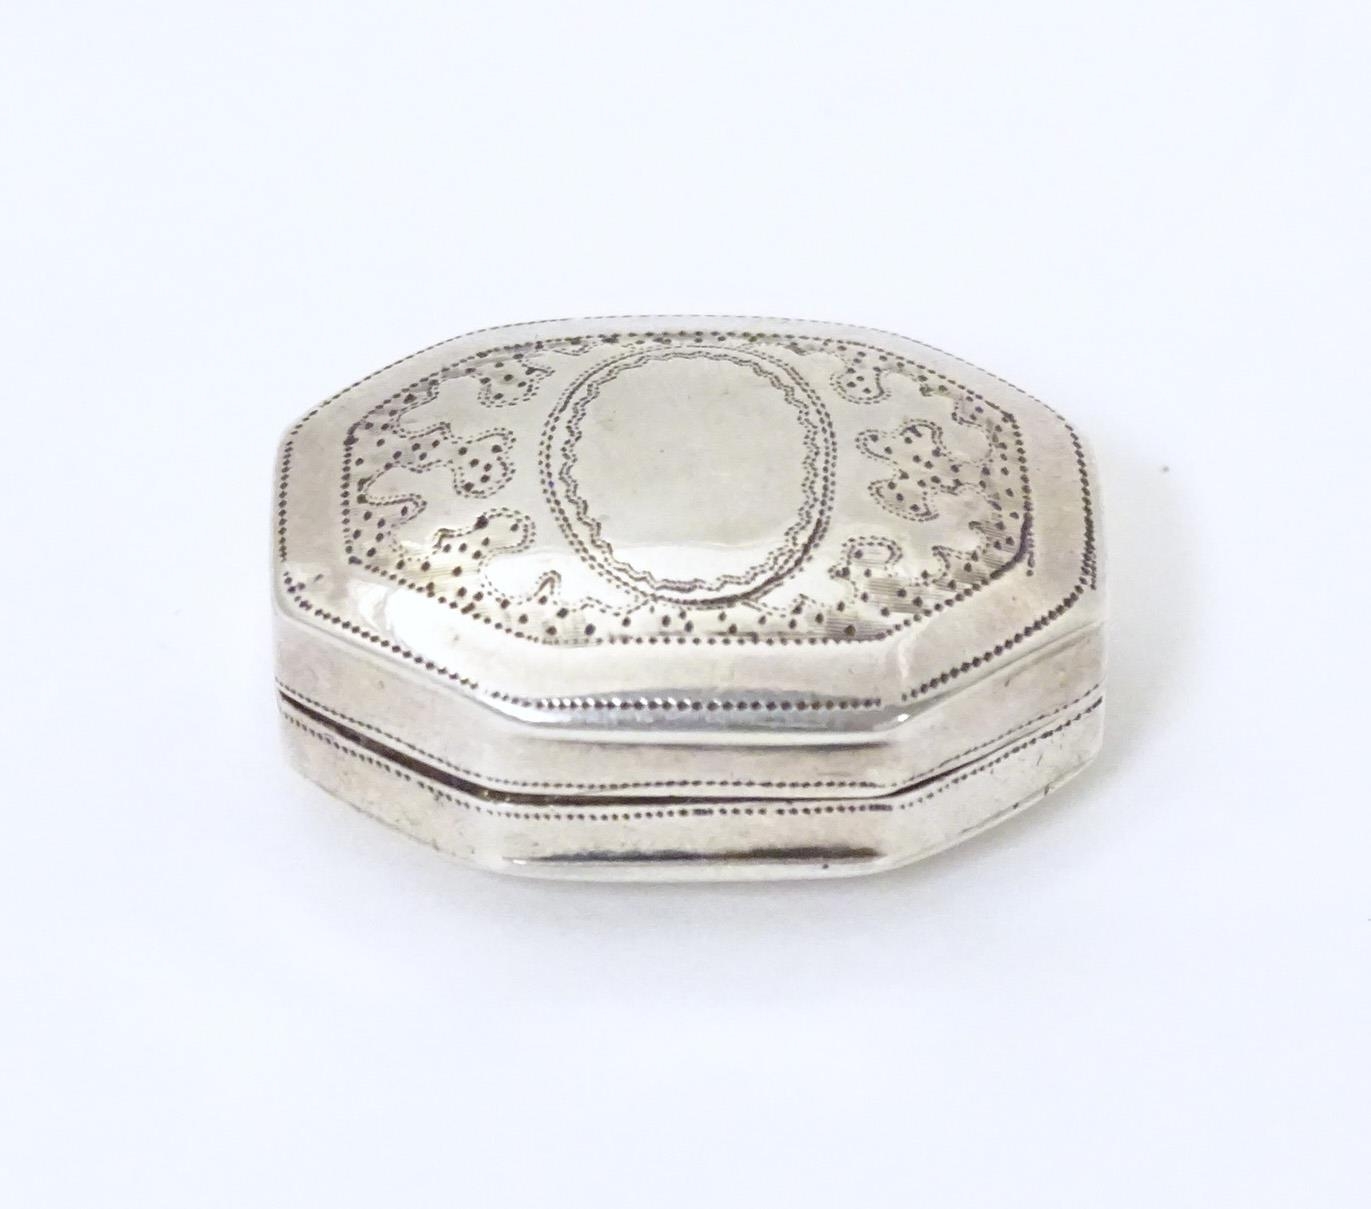 A Geo III silver vinaigrette with engraved decoration opening to reveal gilded interior and - Image 2 of 8